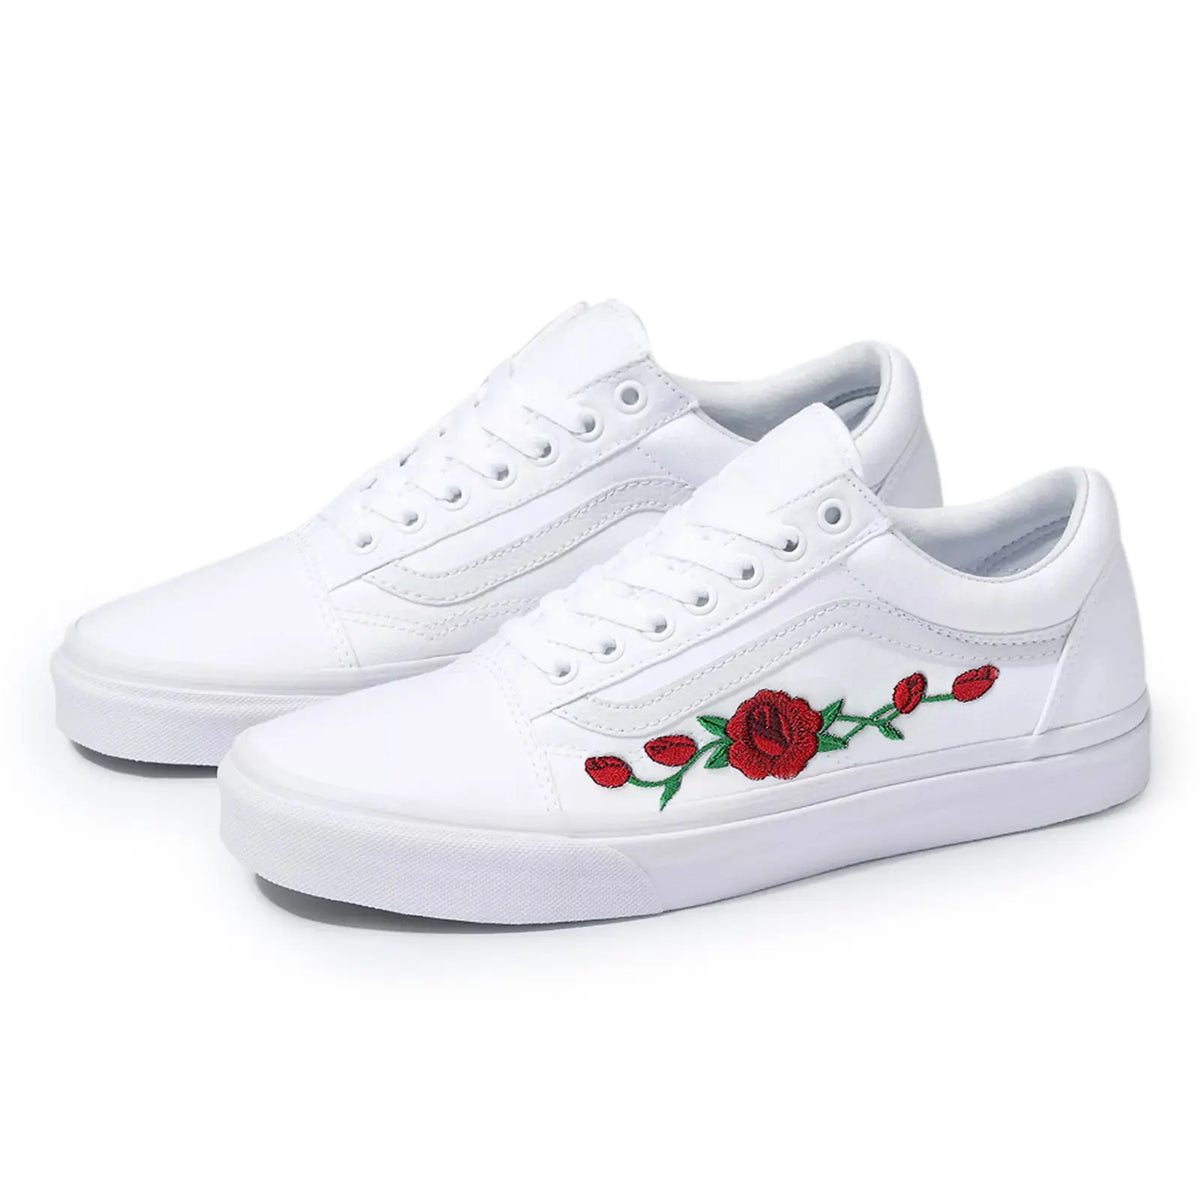 red rose embroidered vans